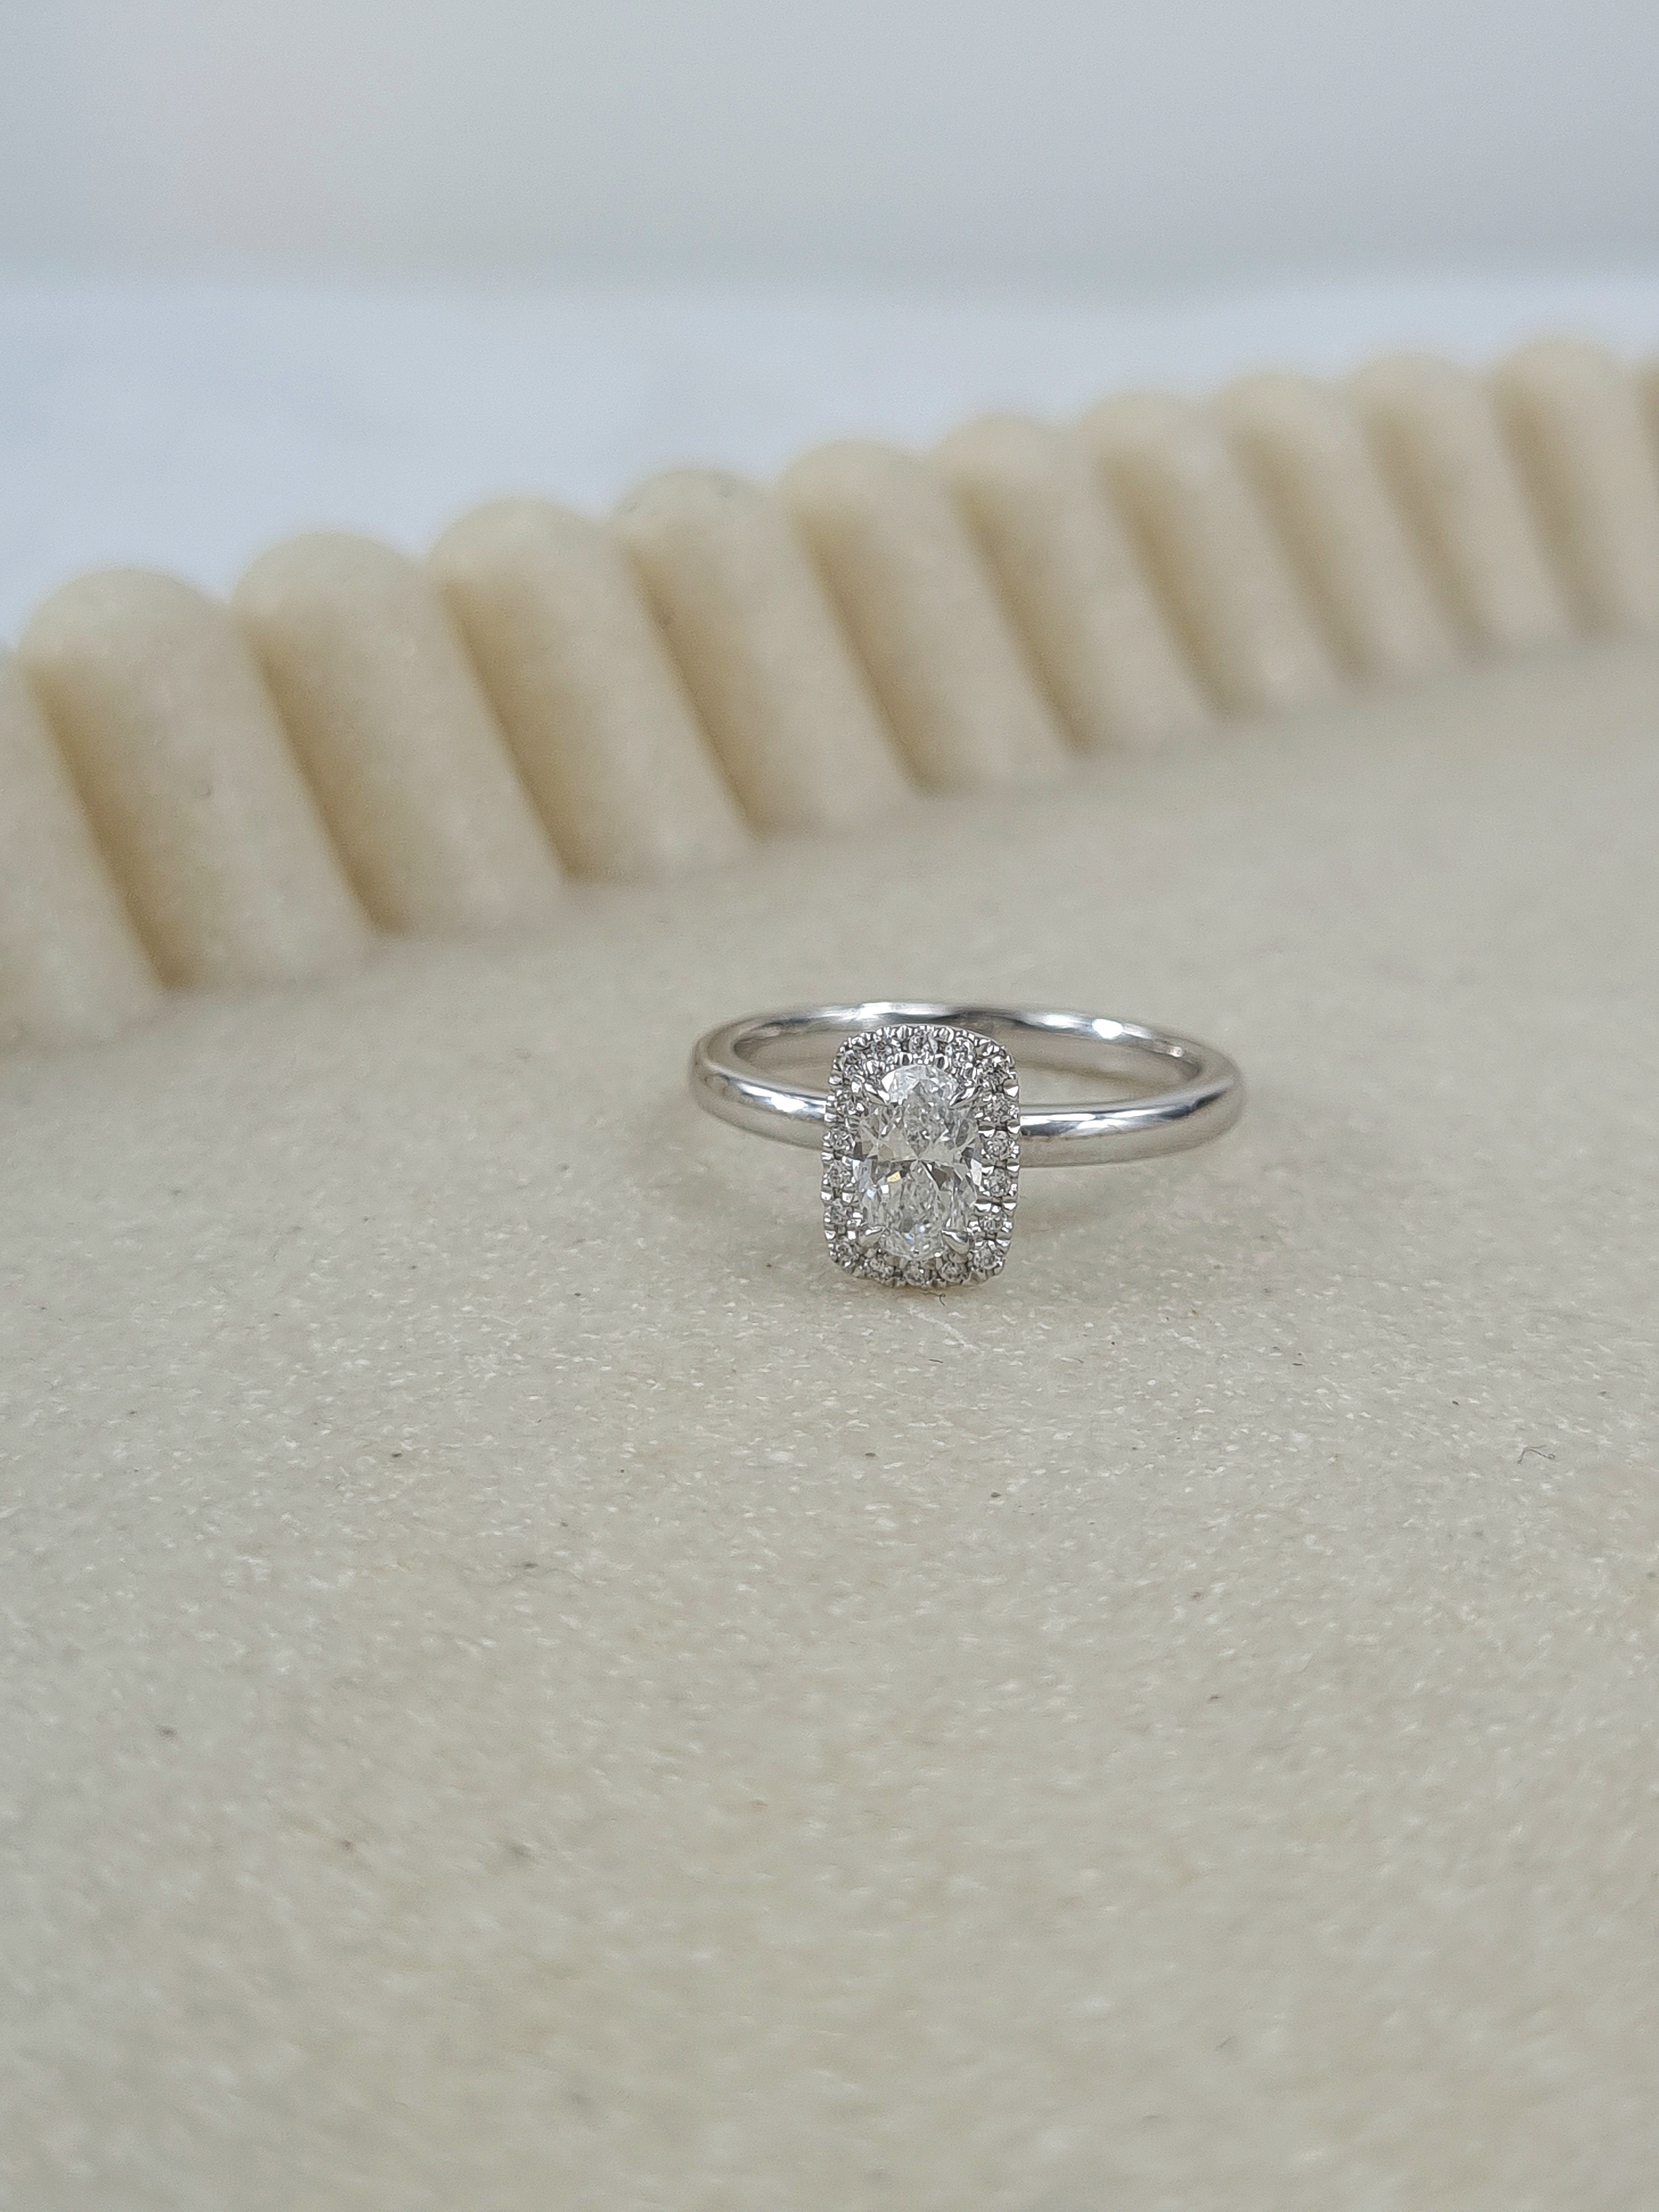 18ct White Gold 0.58ct Oval Cushion-Halo Engagement Ring, 0.50 carat centre.